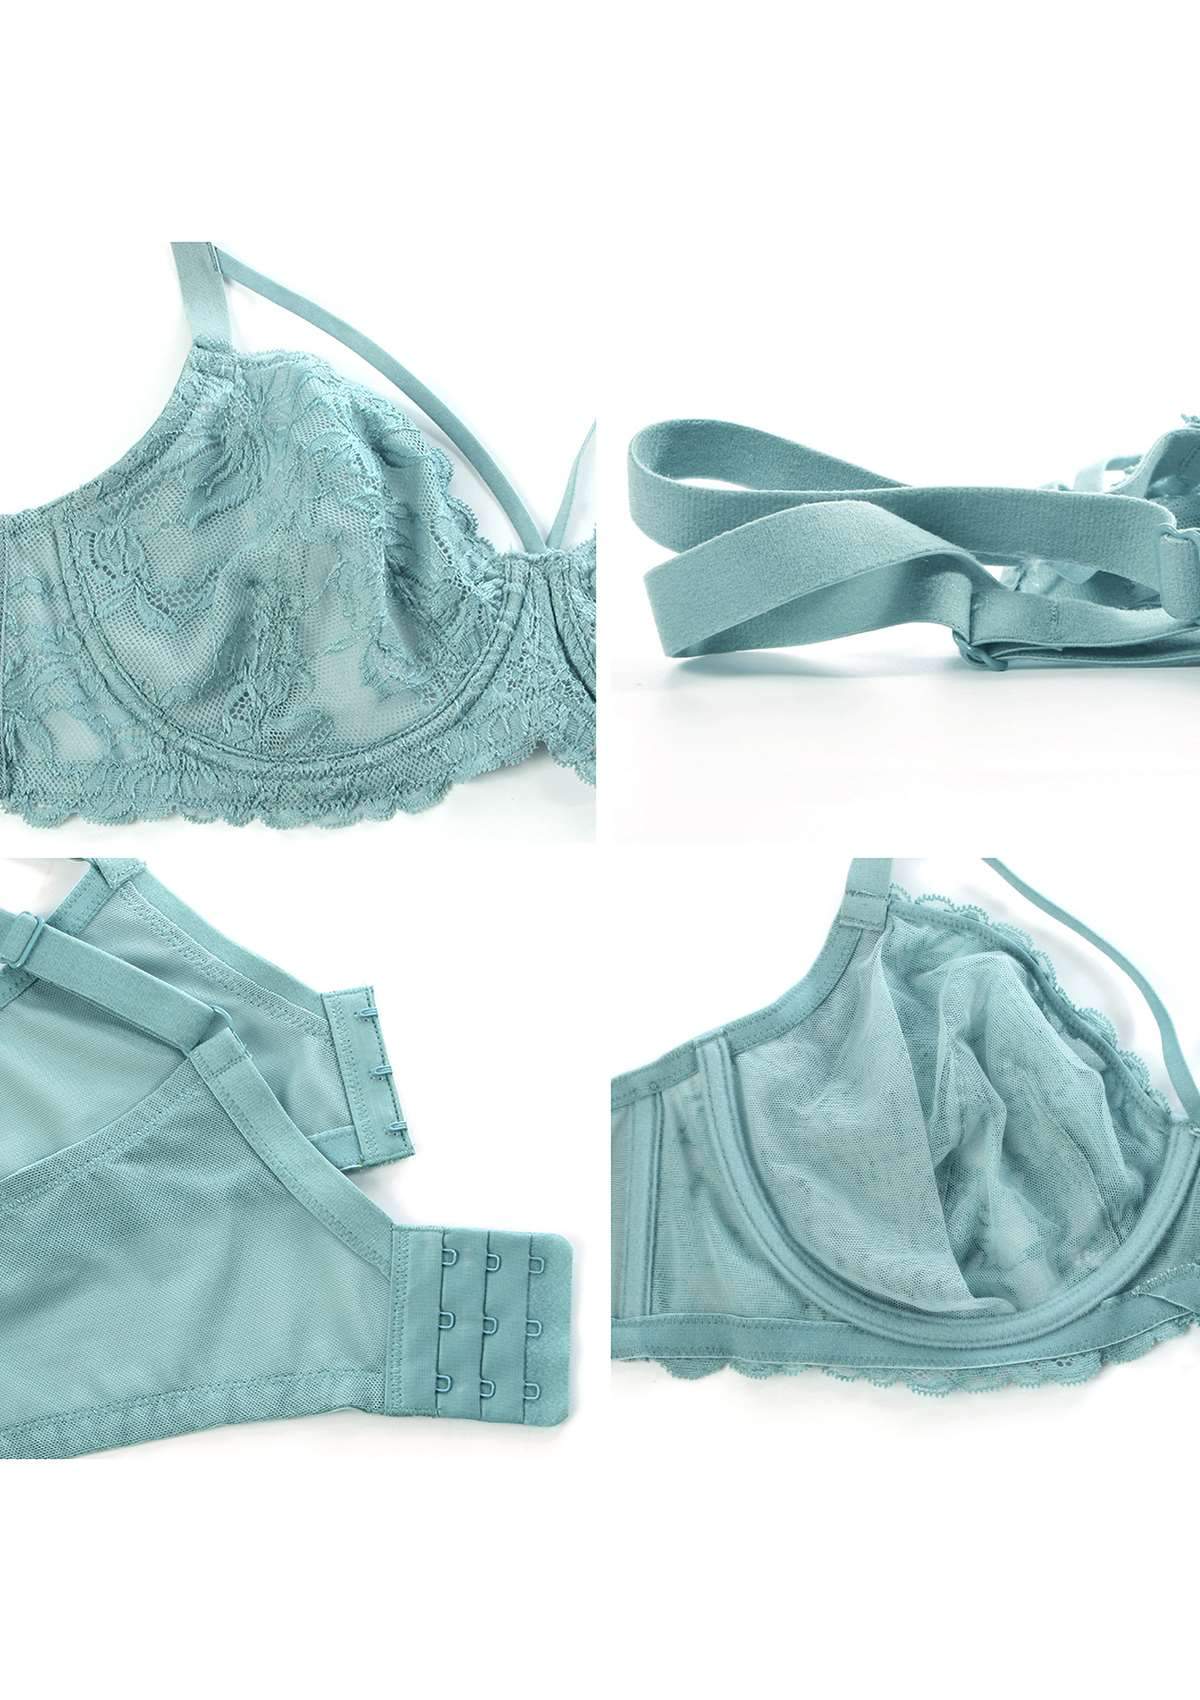 HSIA Pretty In Petals Unlined Lace Bra: Comfortable And Supportive Bra - Pewter Blue / 34 / D